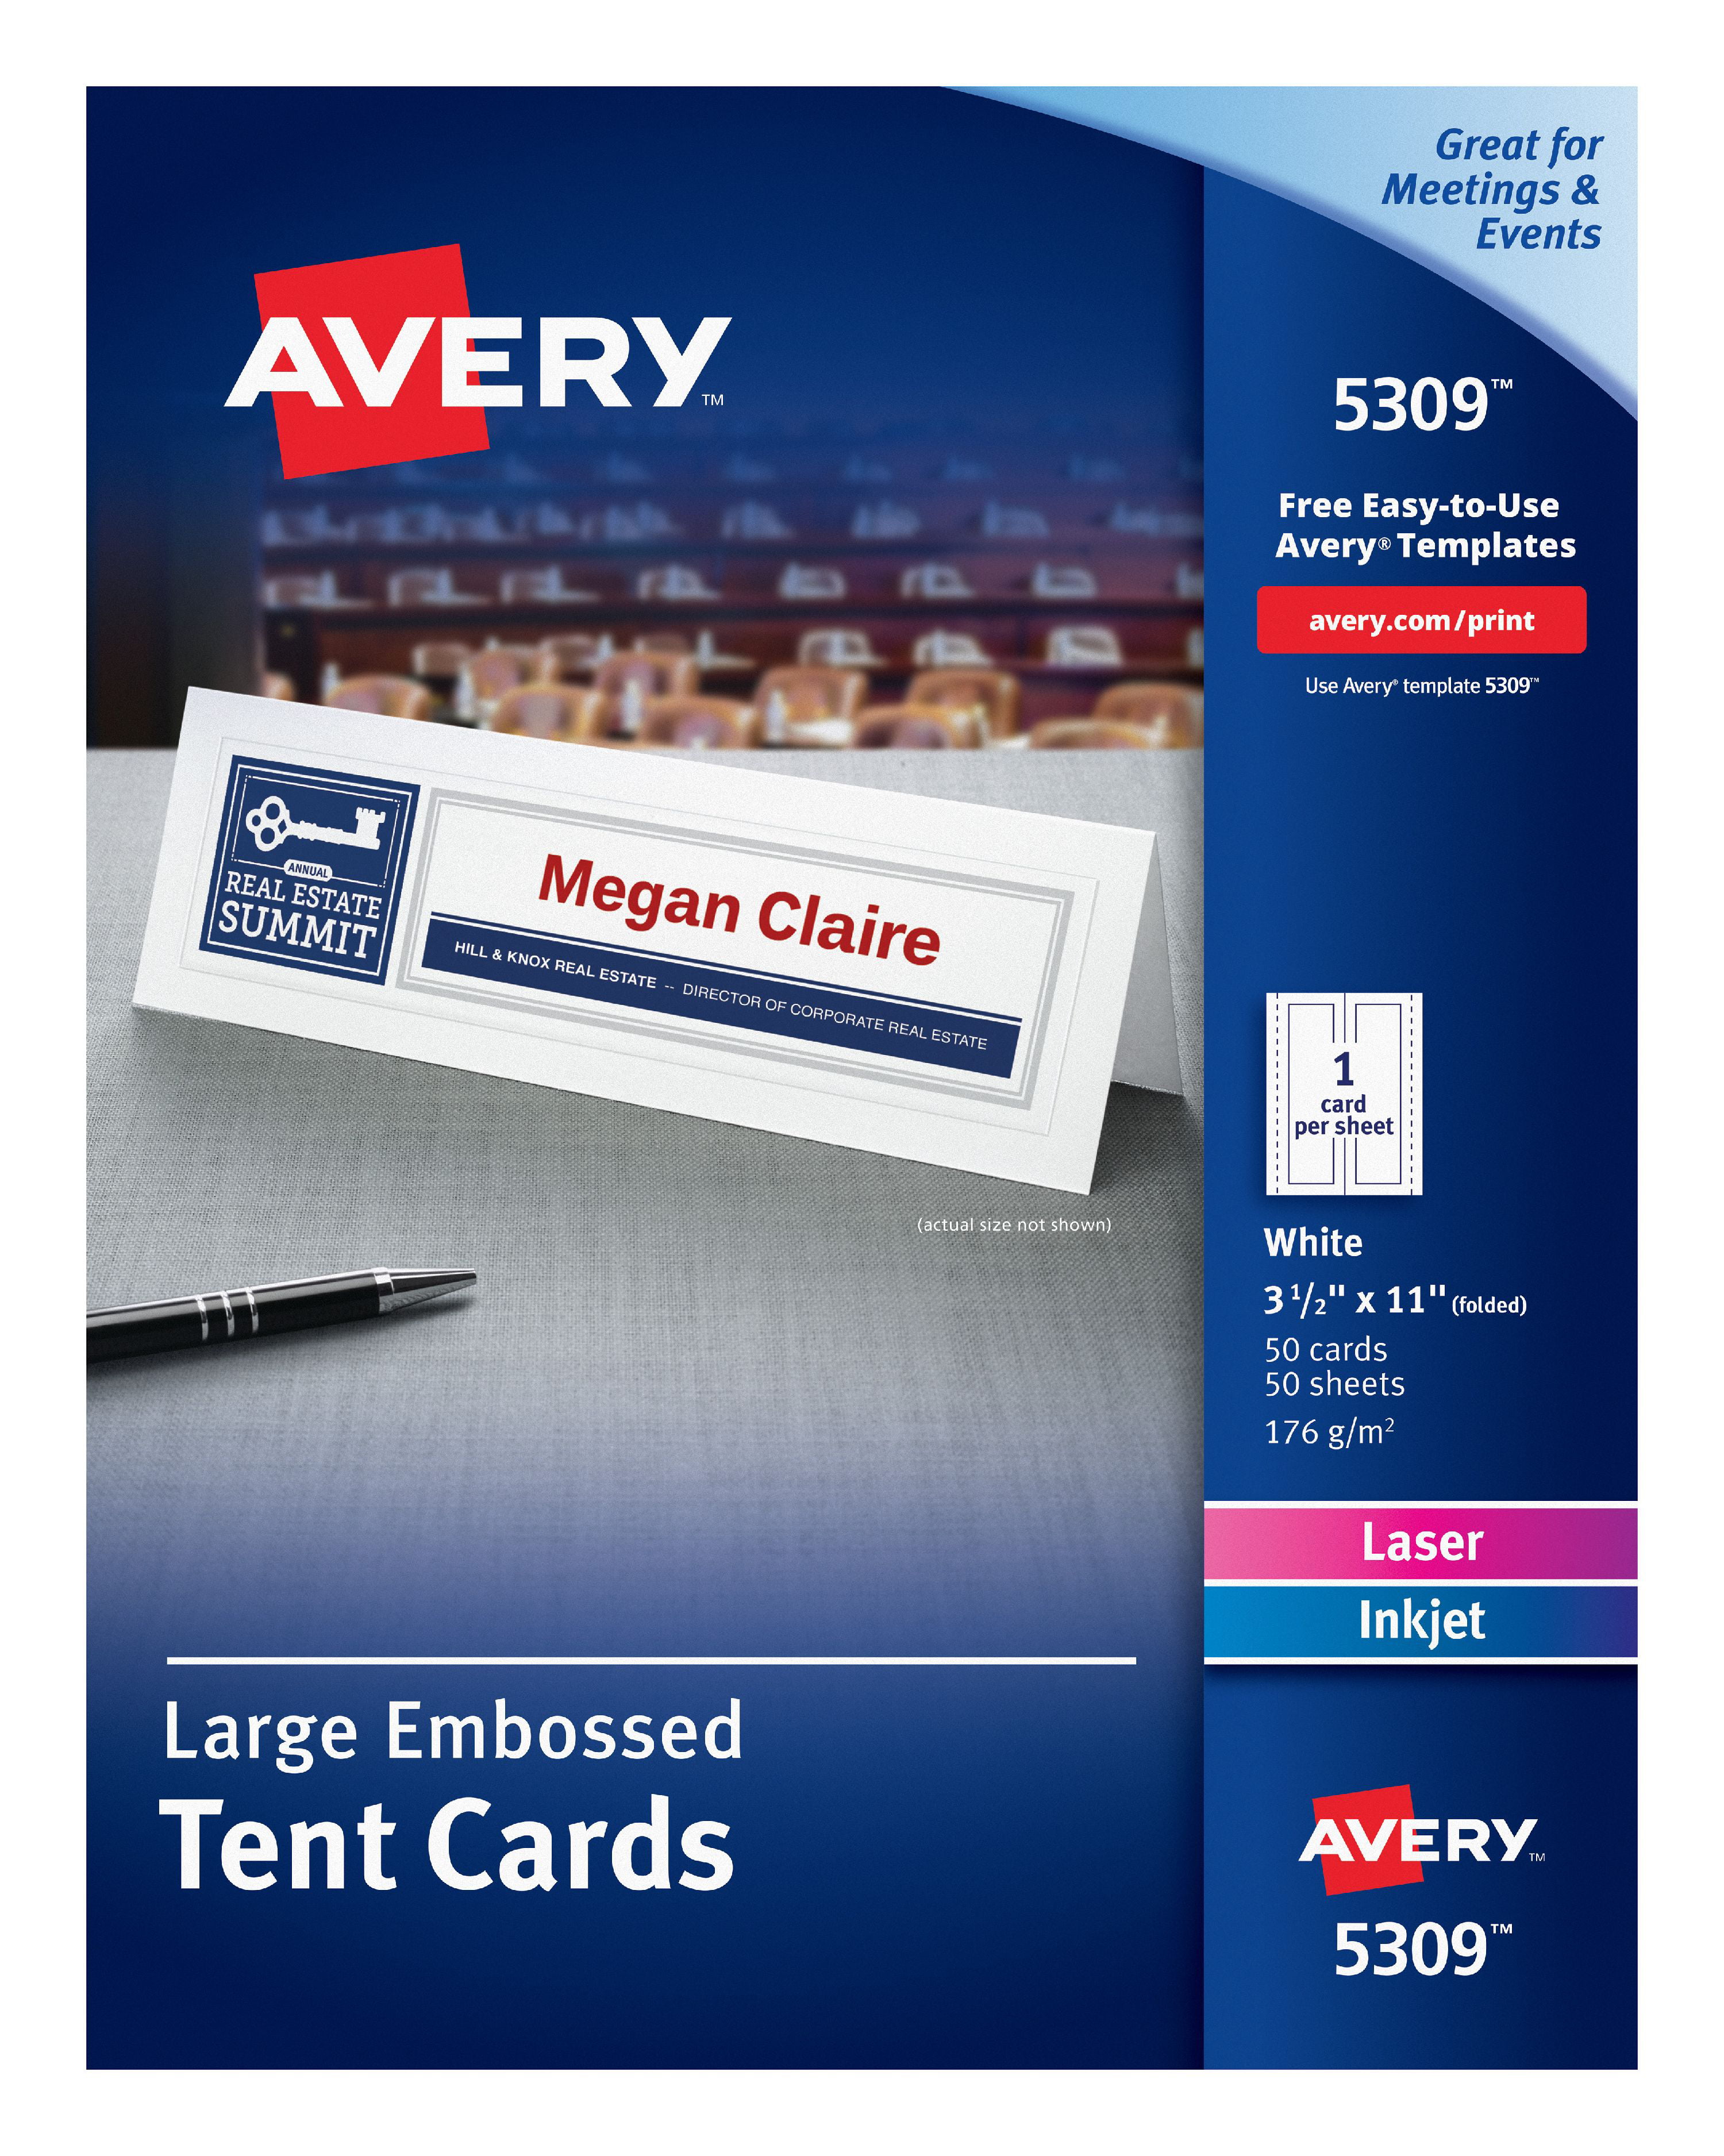 Avery Printable Large Tent Cards, Embossed, TwoSided